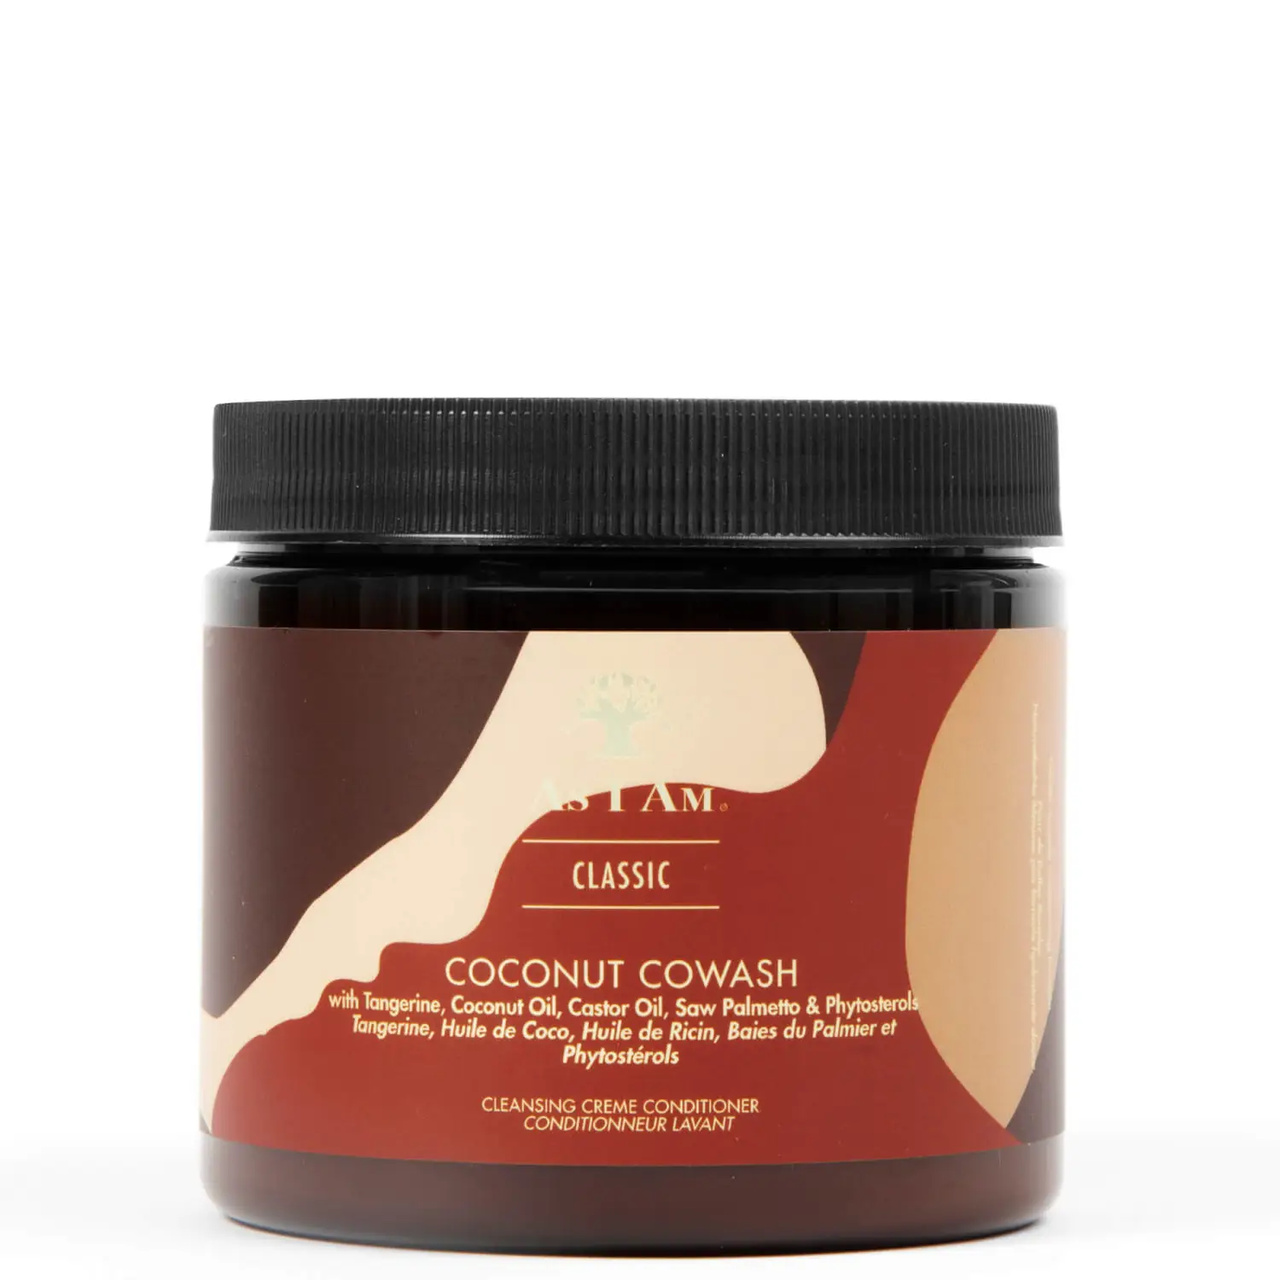 As I Am Coconut Cowash Cleansing Creme Conditioner 454g